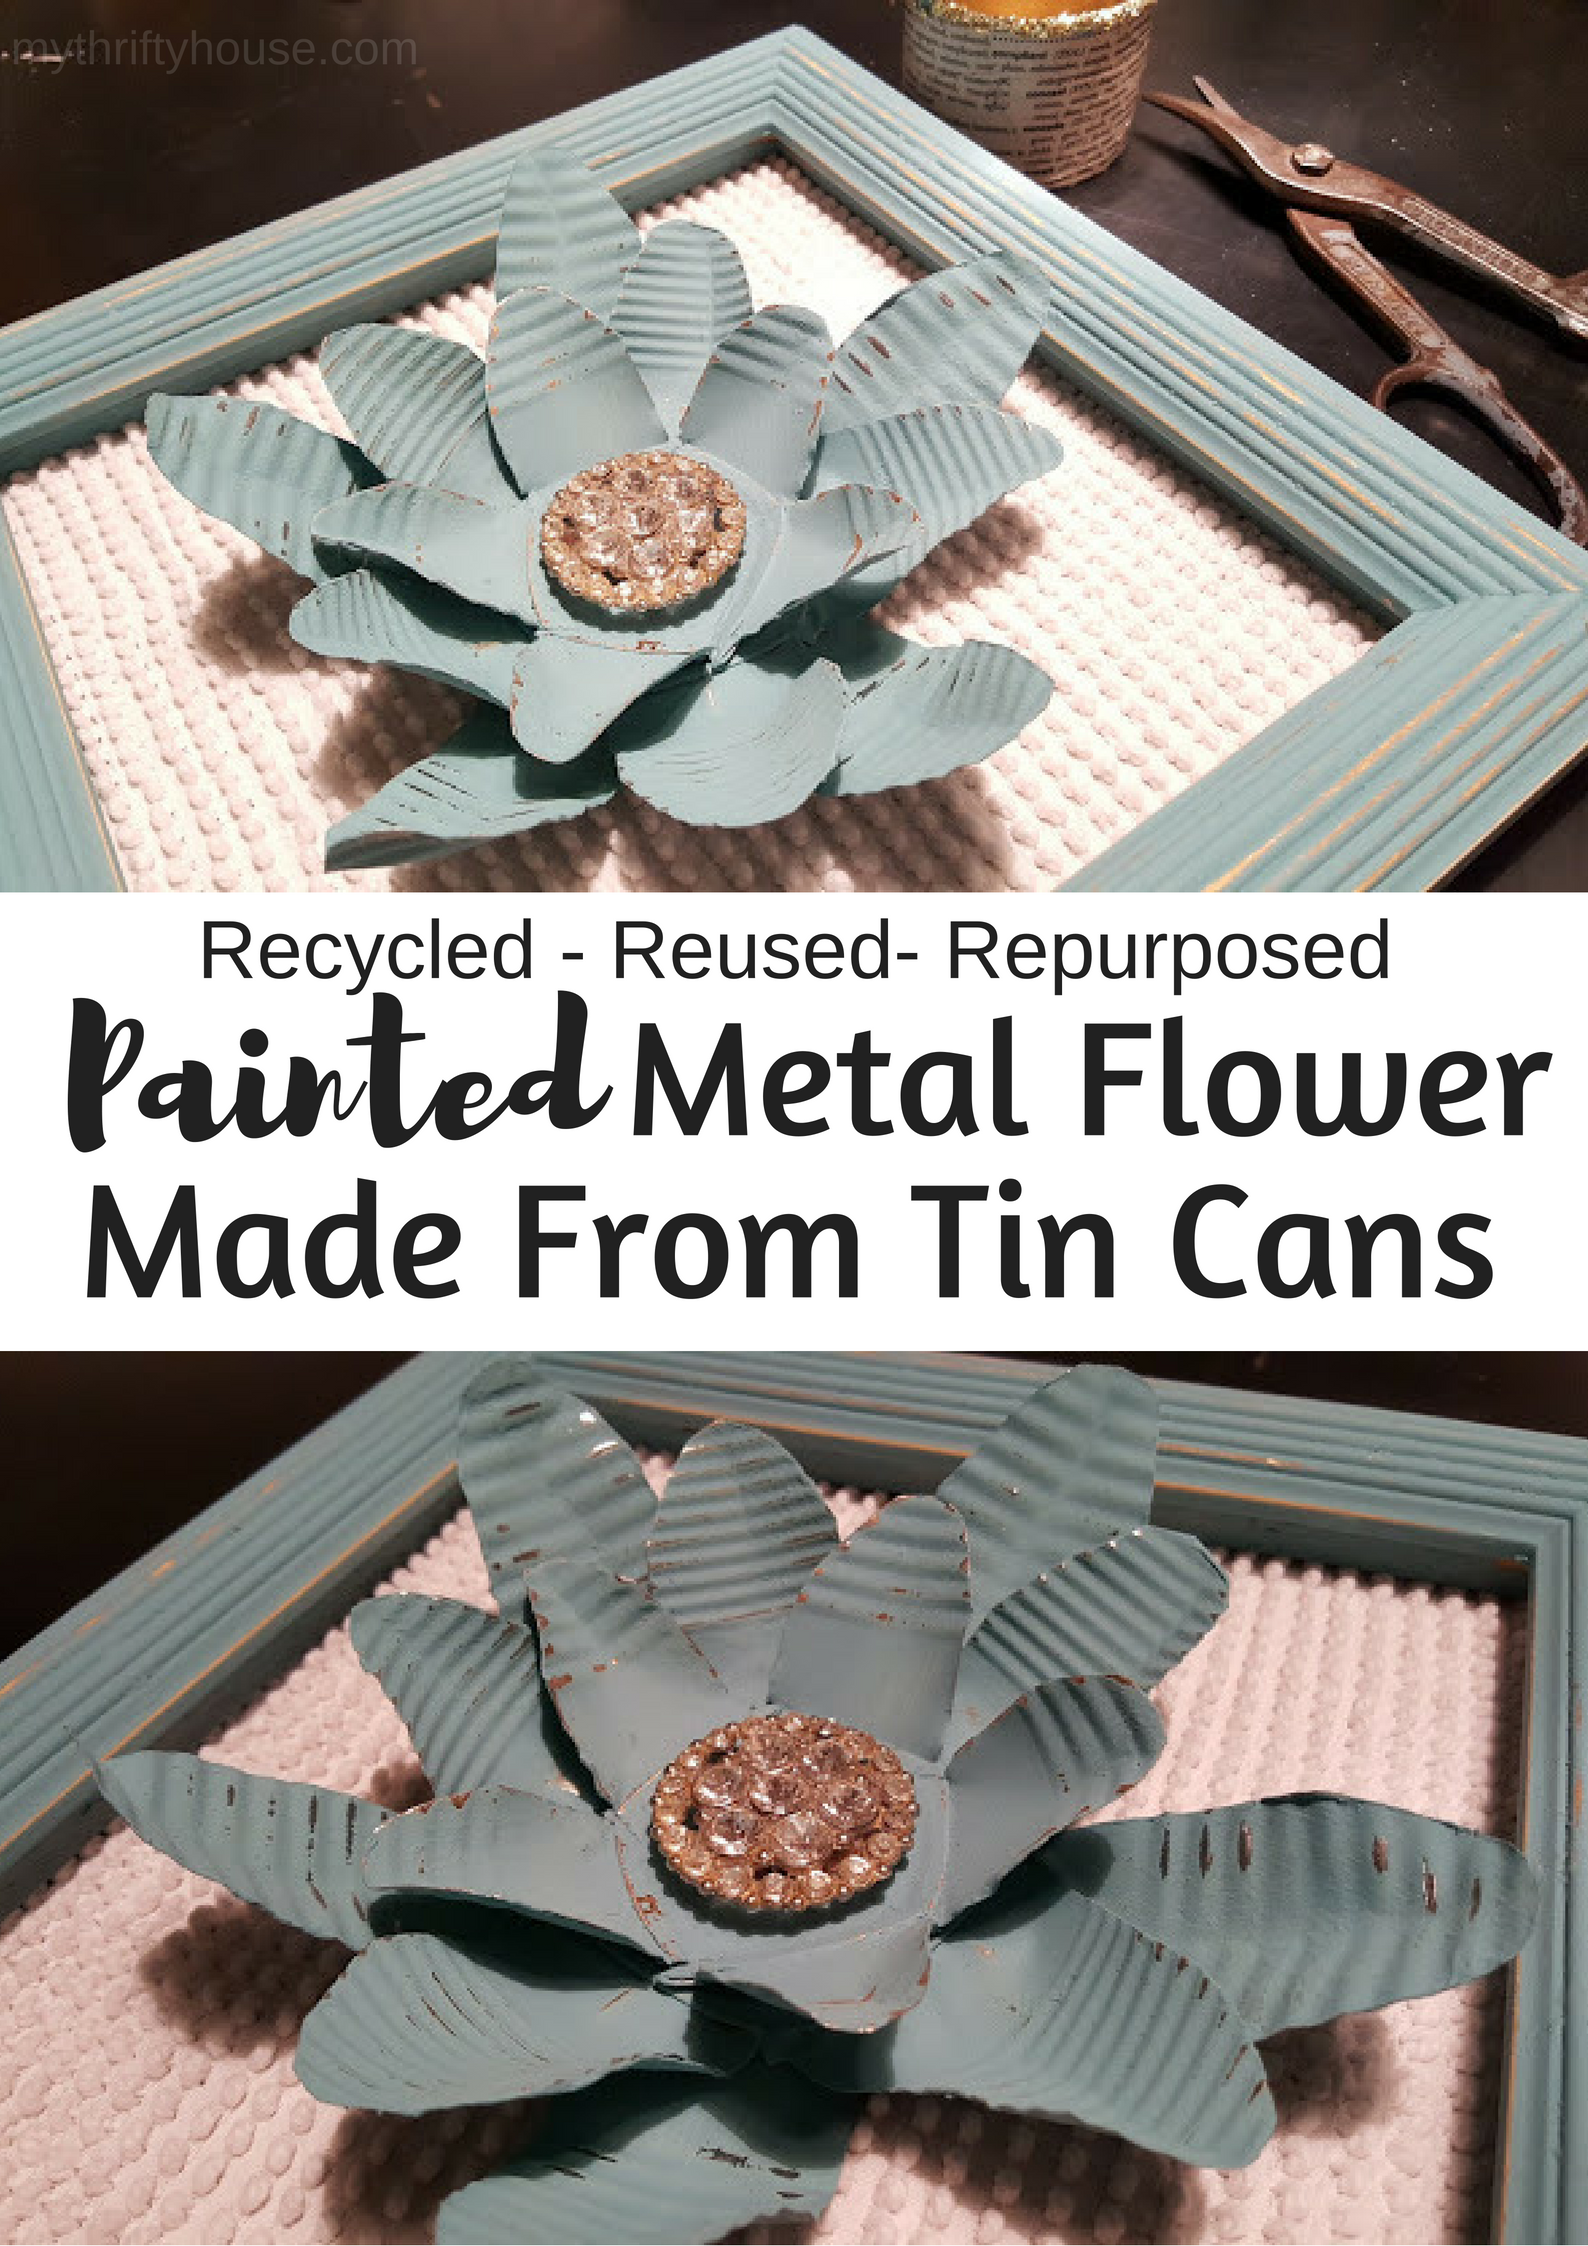 Painted Metal Flower Made from Tin Cans